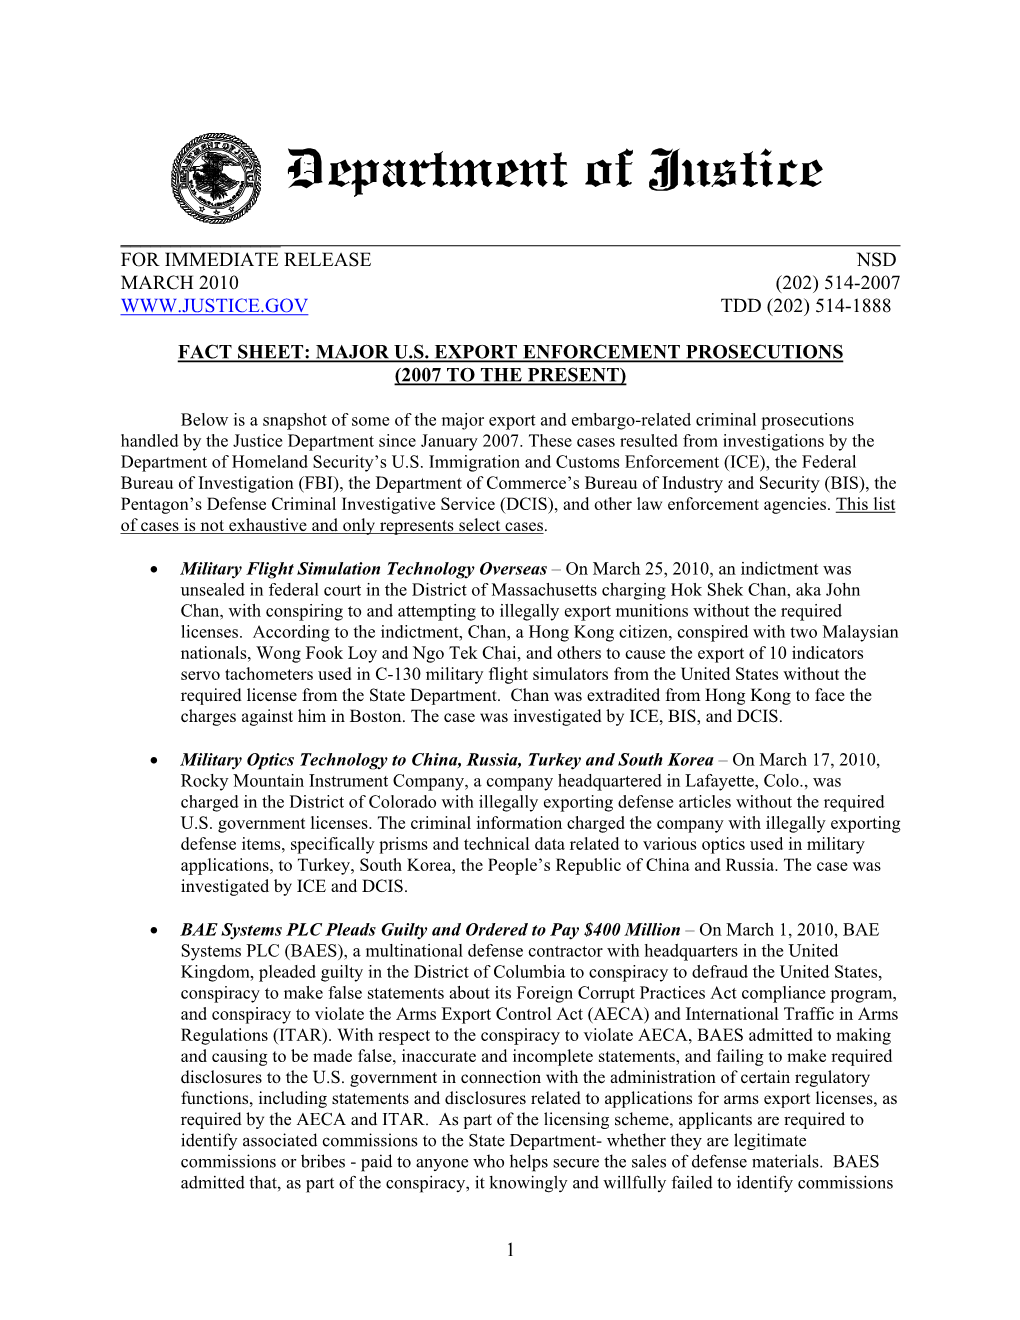 Fact Sheet: Major U.S. Export Enforcement Prosecutions (2007 to the Present)